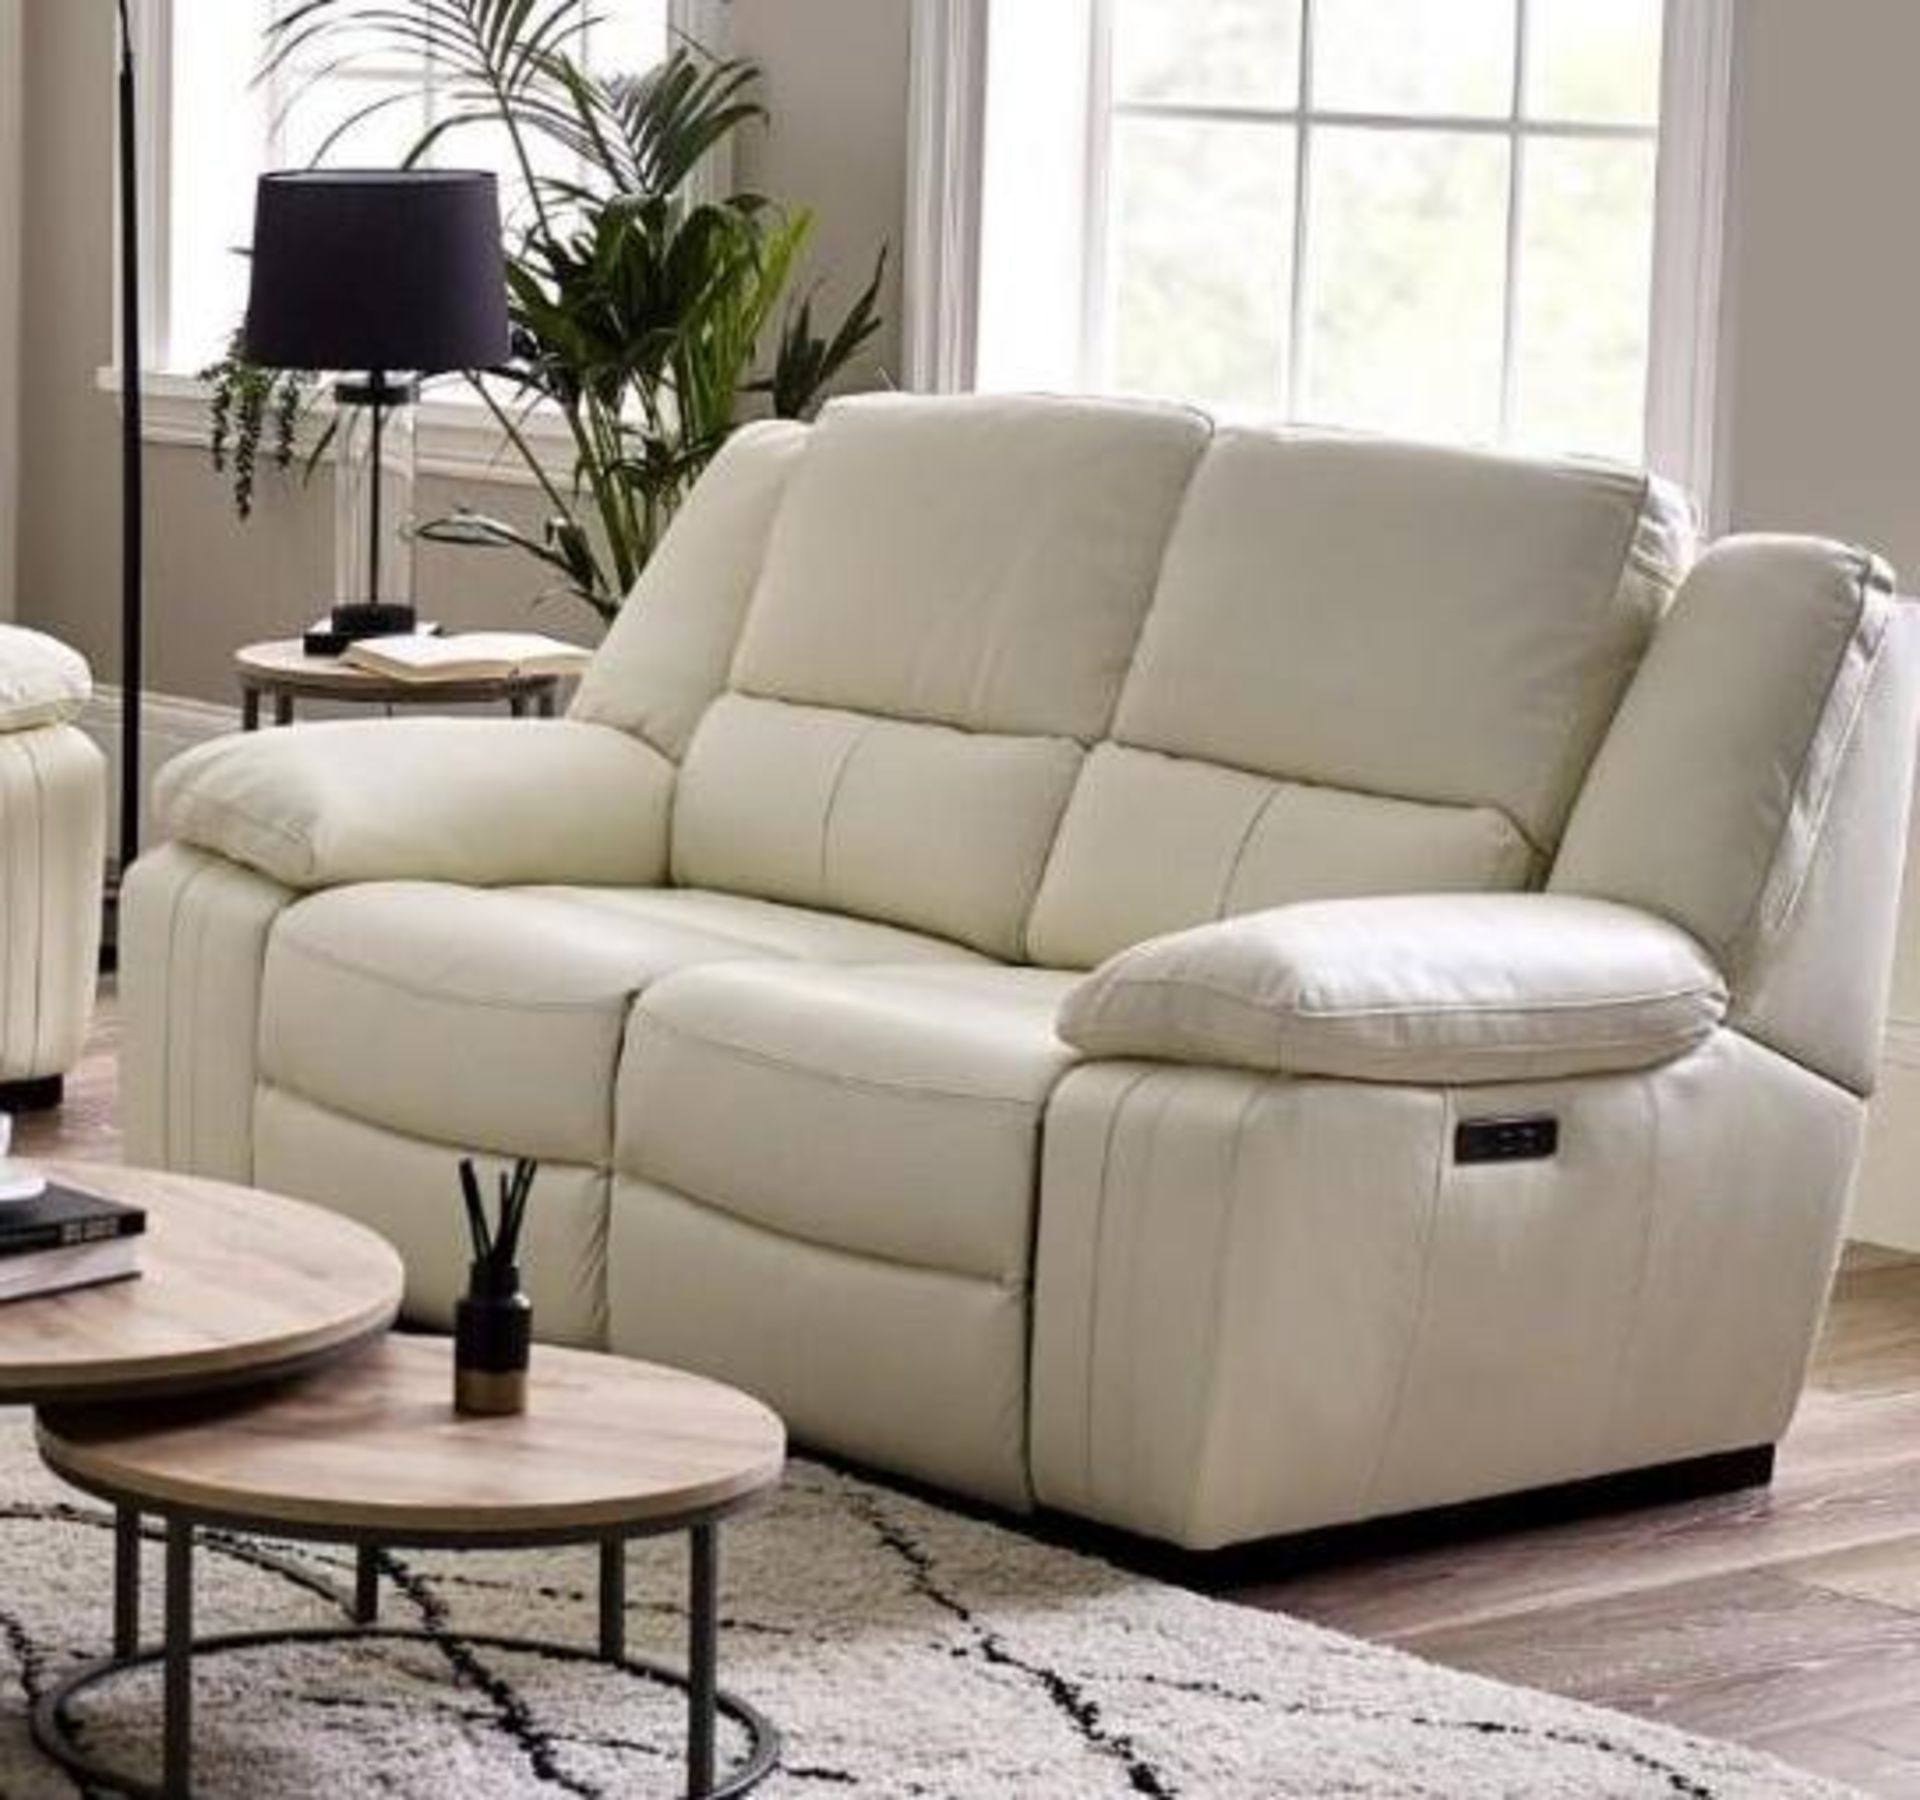 Brand new and boxed SCS Fallon 2 seater electric reclining sofa in Cream.